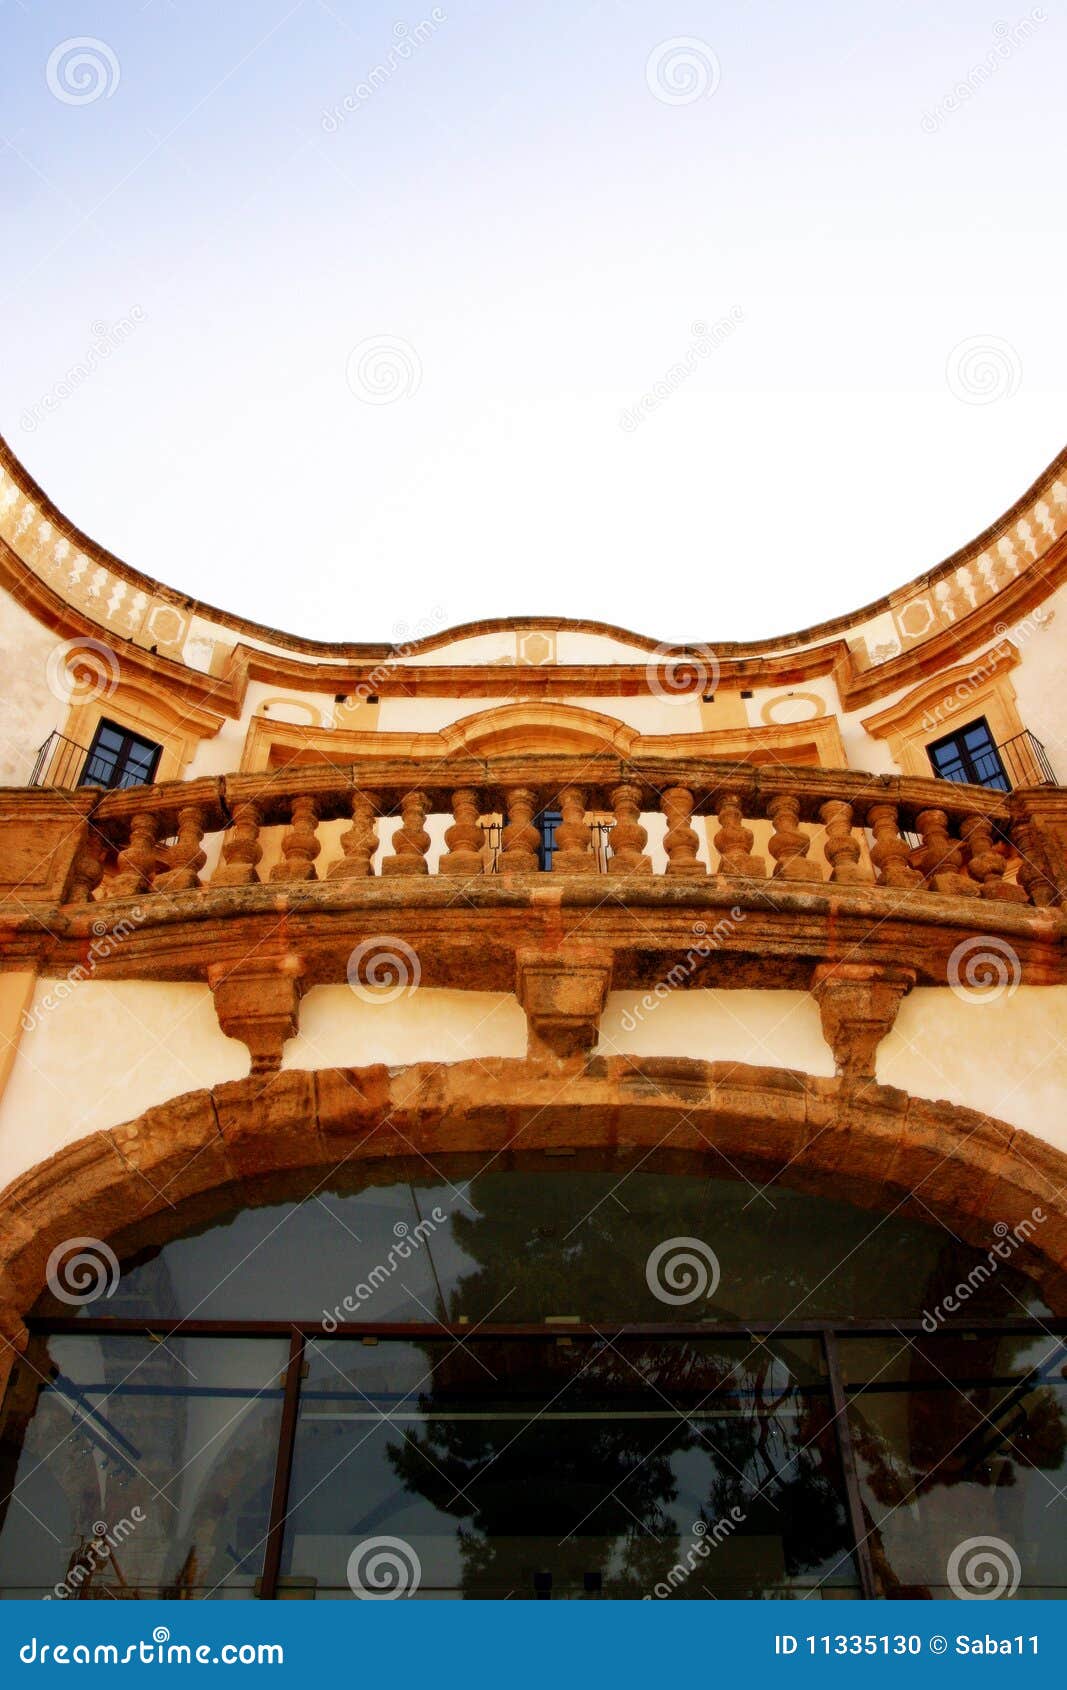 Ancient house balcony, Bagheria, Sicily. Anciient villa museum facade architecture &amp; stairs. The villa was the house of the famous painter Renato Guttuso. Island of Sicily, Italy.